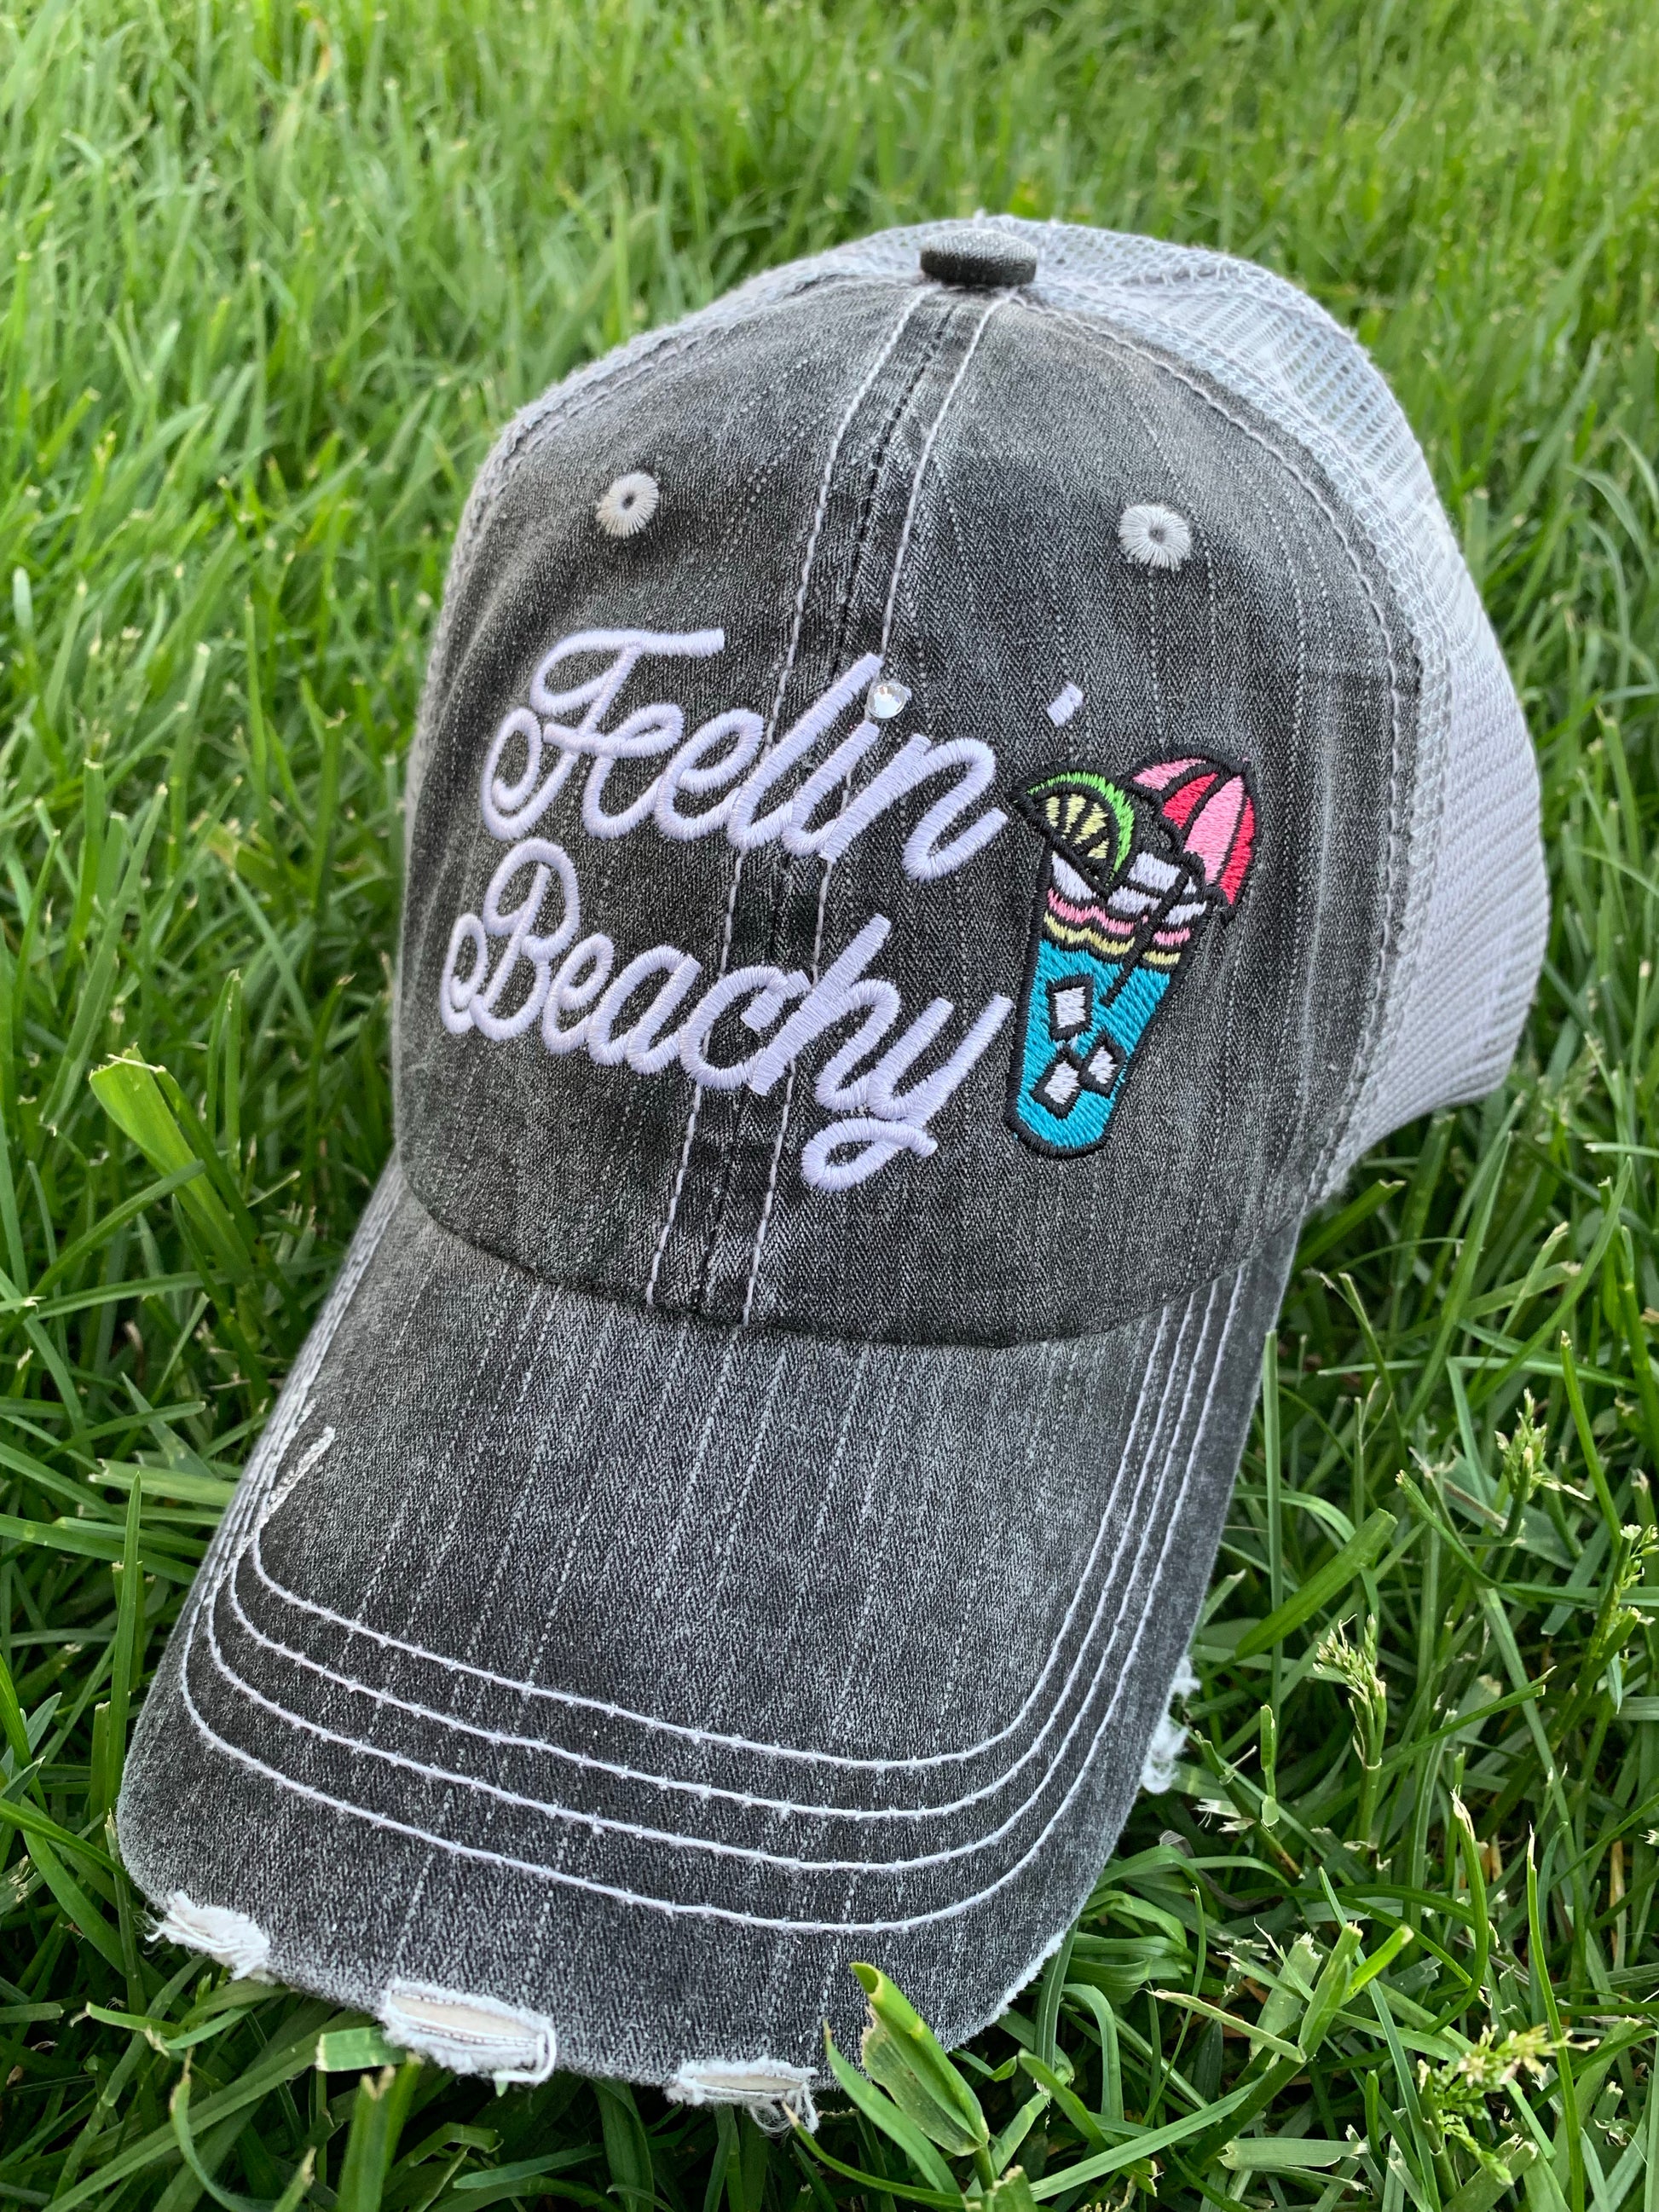 Hat { Cruise hair don't care } { Bo-oze cruise } Embroidered distressed trucker caps. - Stacy's Pink Martini Boutique